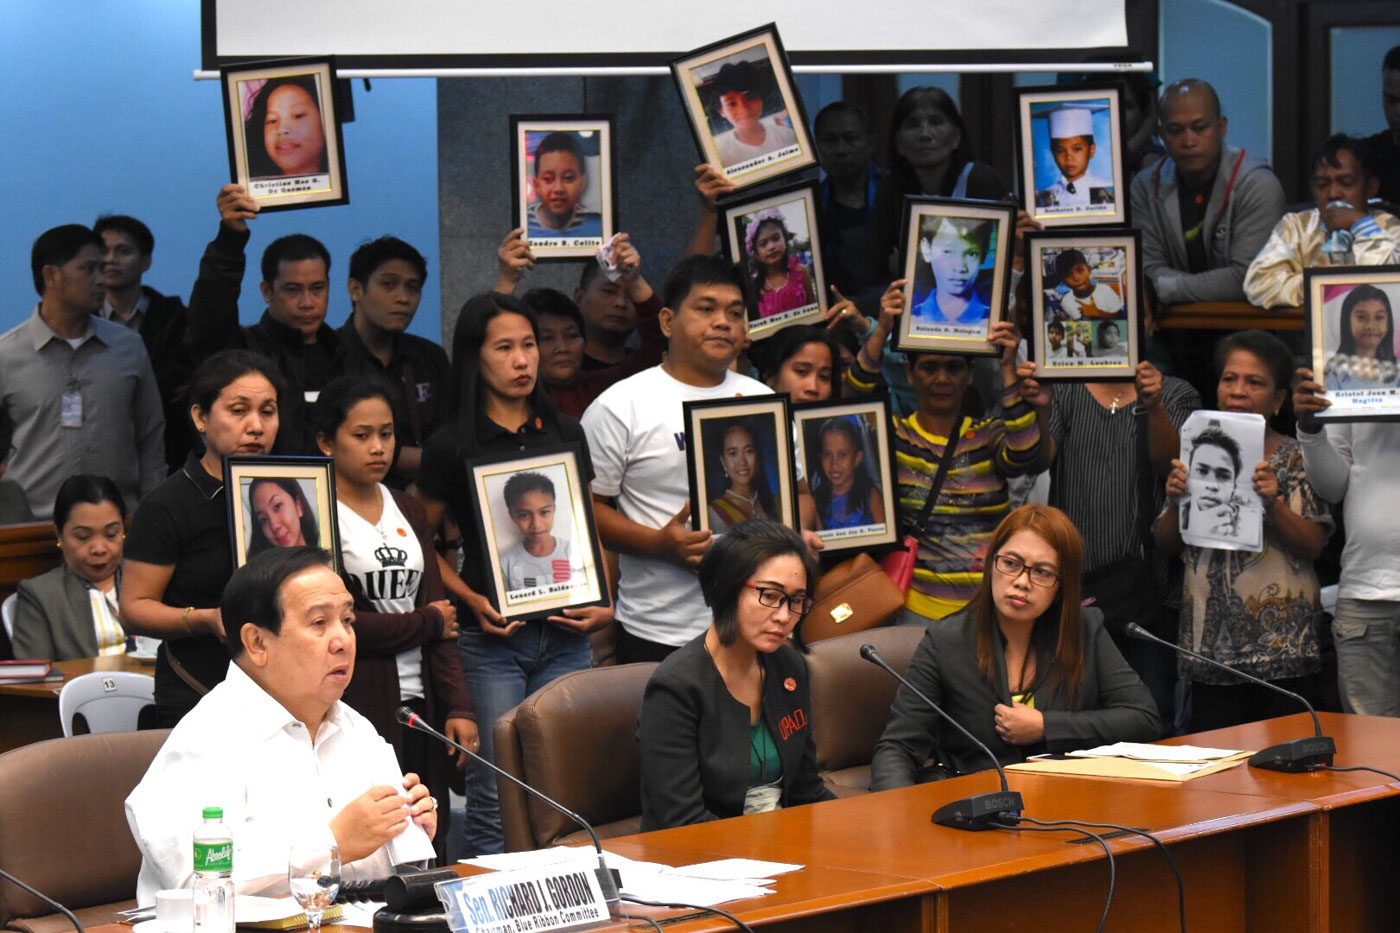 DENGVAXIA PROBE. Relatives display portraits of their loved ones believe to have died from Dengvaxia vaccination as the Senate conducts its 7th hearing on the dengue vaccine controversy on March 13, 2018. Photo by Angie de Silva/Rappler 